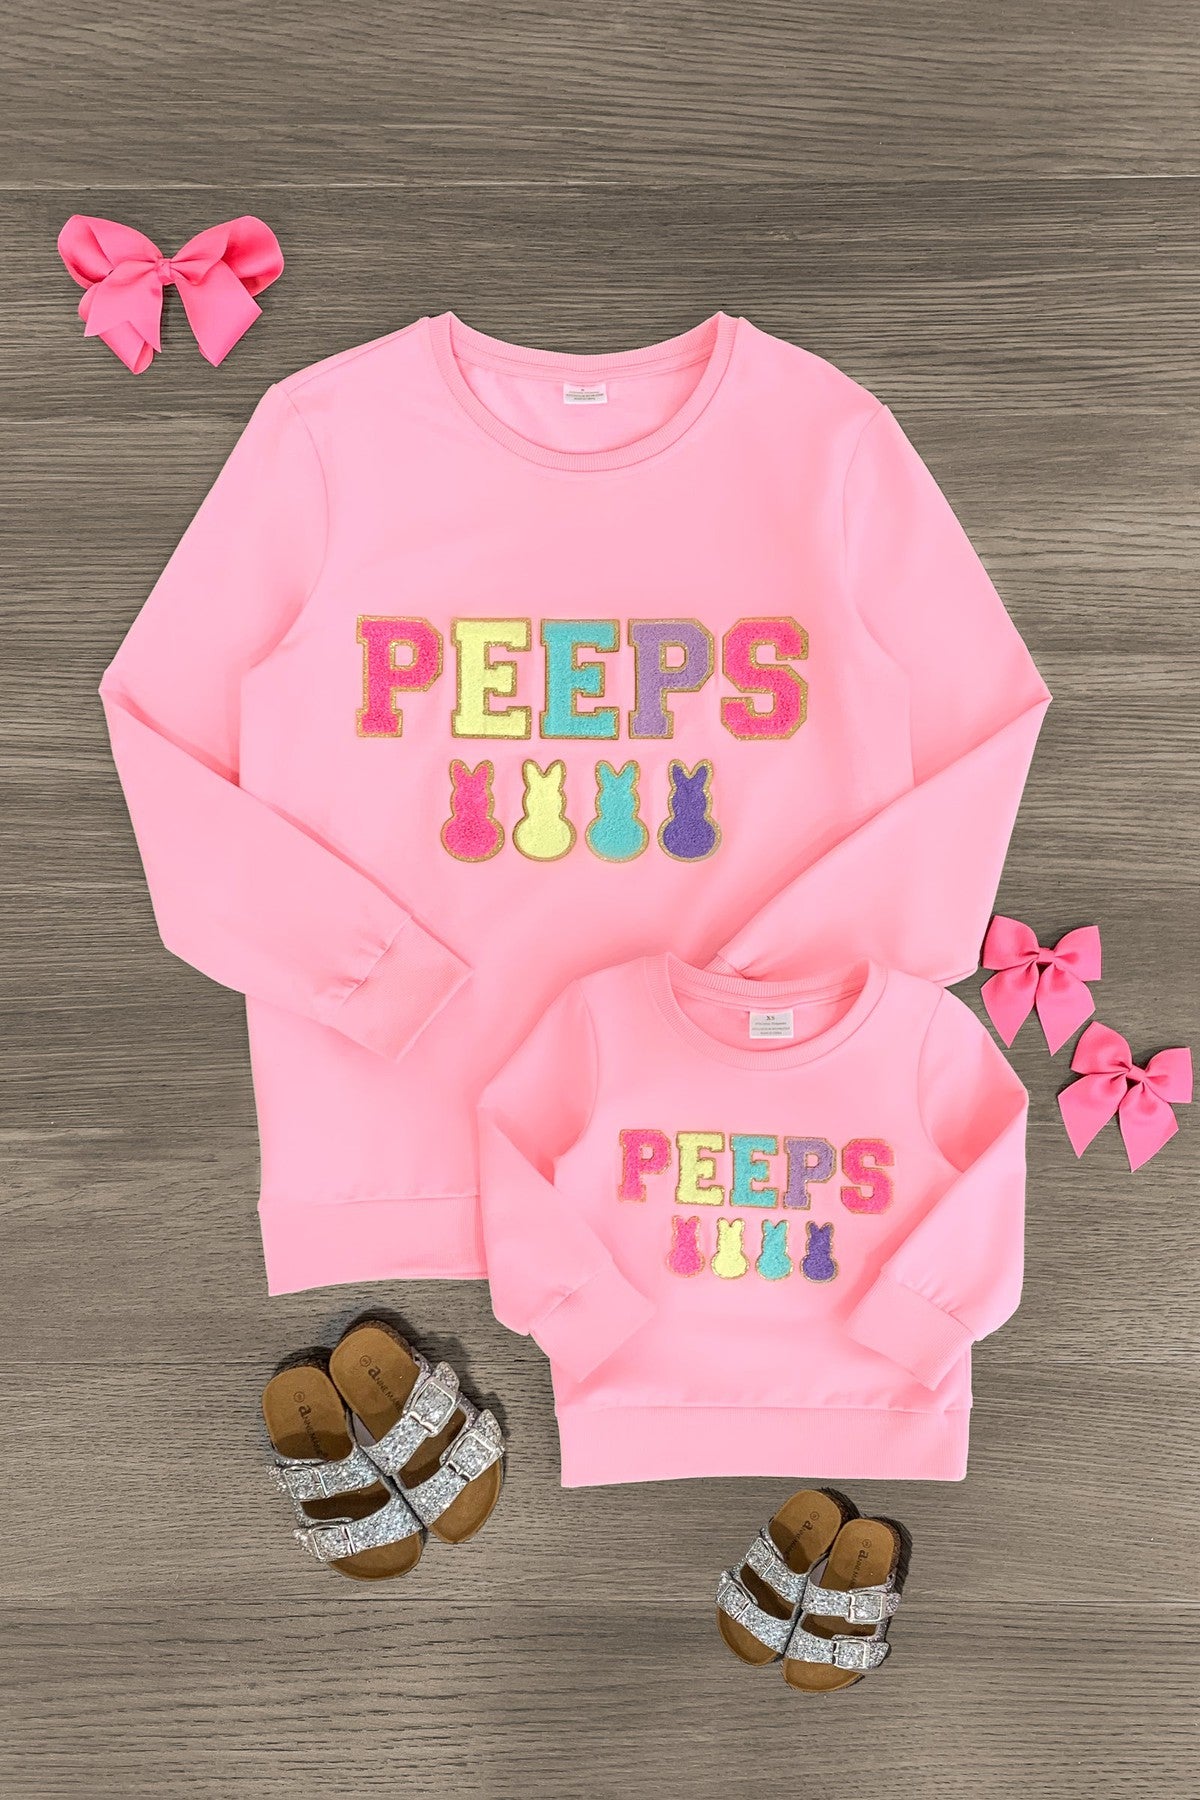 Mom & Me - "Peeps" Pink Chenille Patch Top - Sparkle in Pink